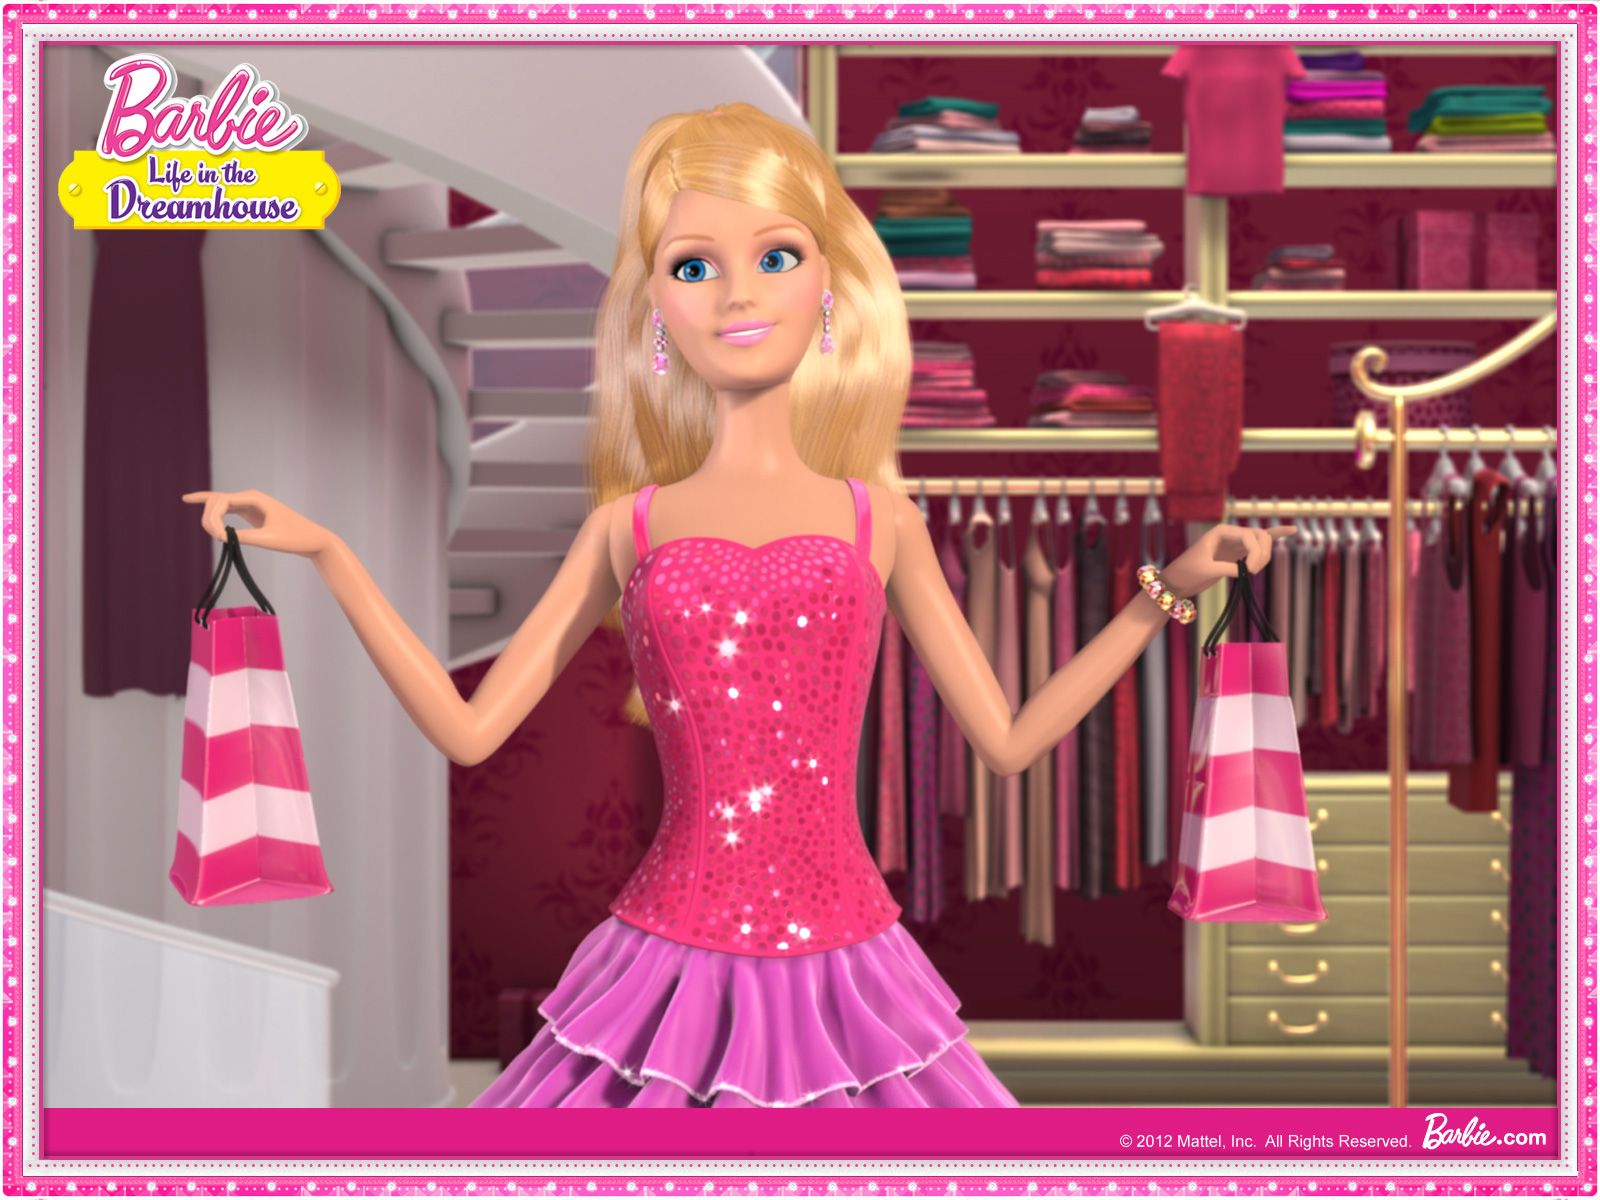 barbie life in the dreamhouse Movies Wallpaper 30807873